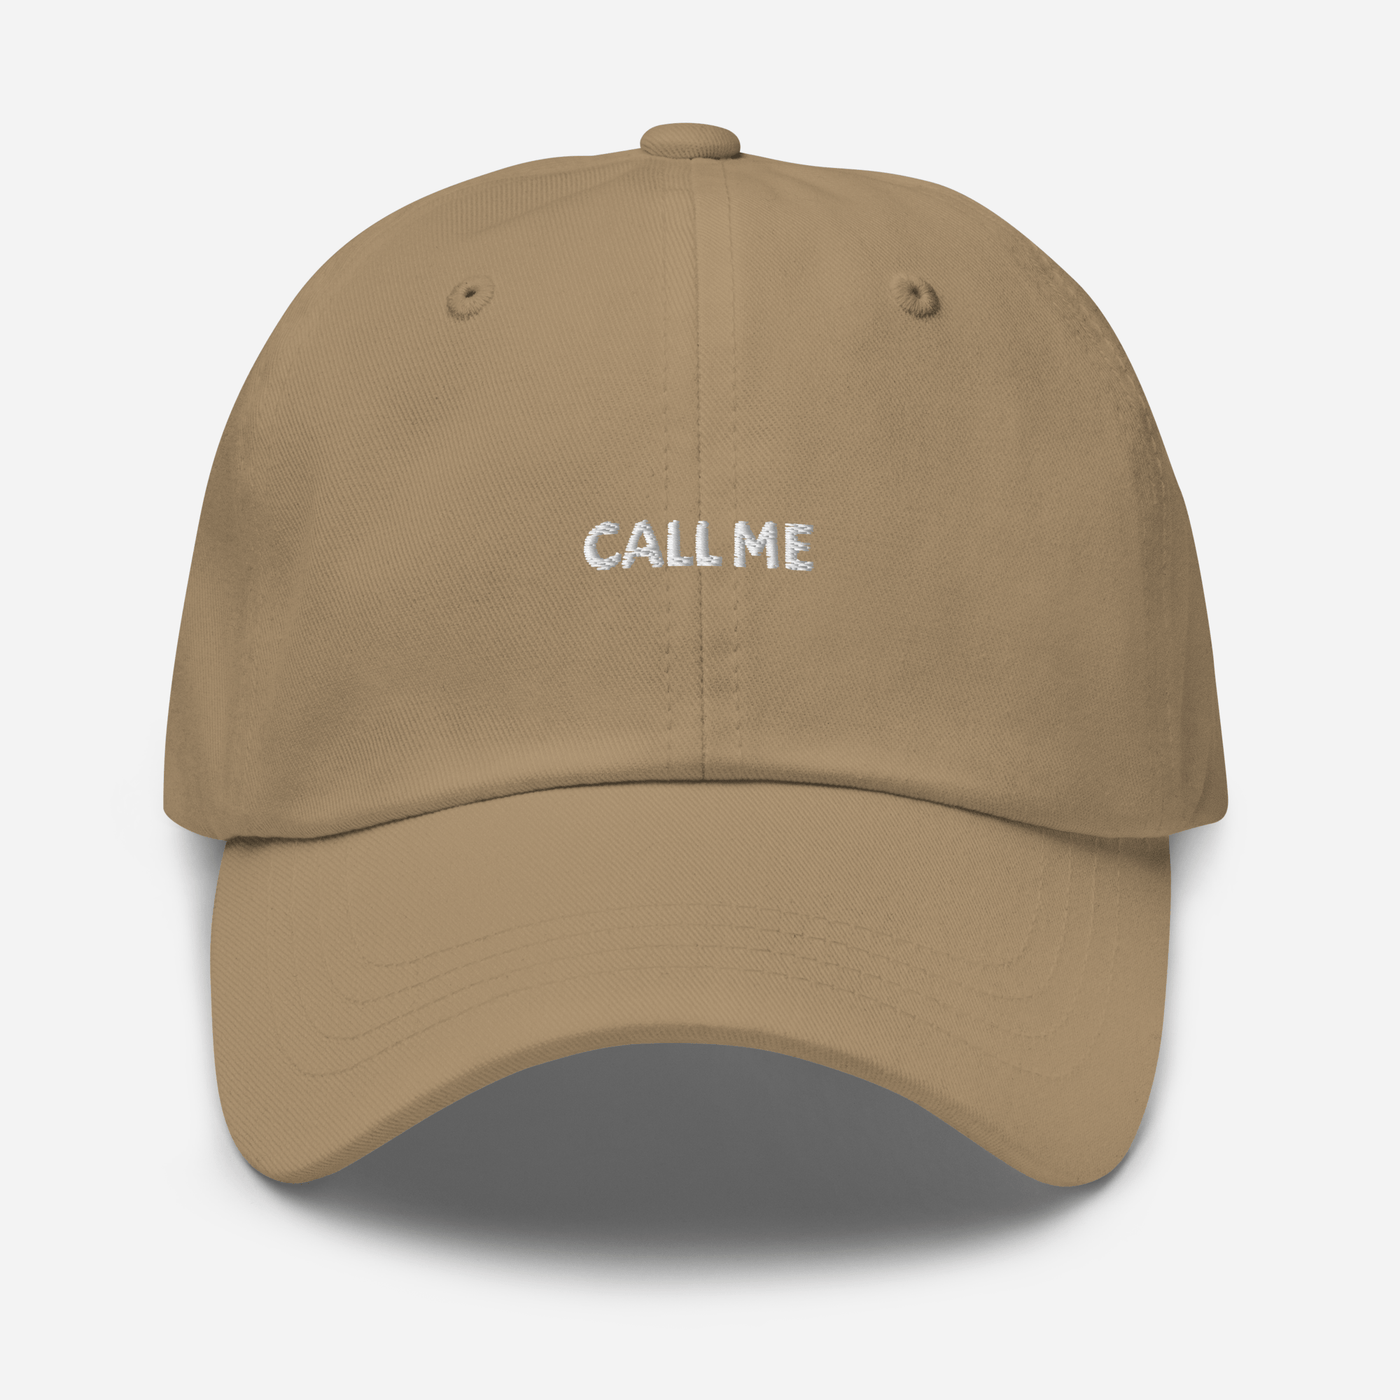 Call Me Dad hat - Khaki - - Just Another Cap Store